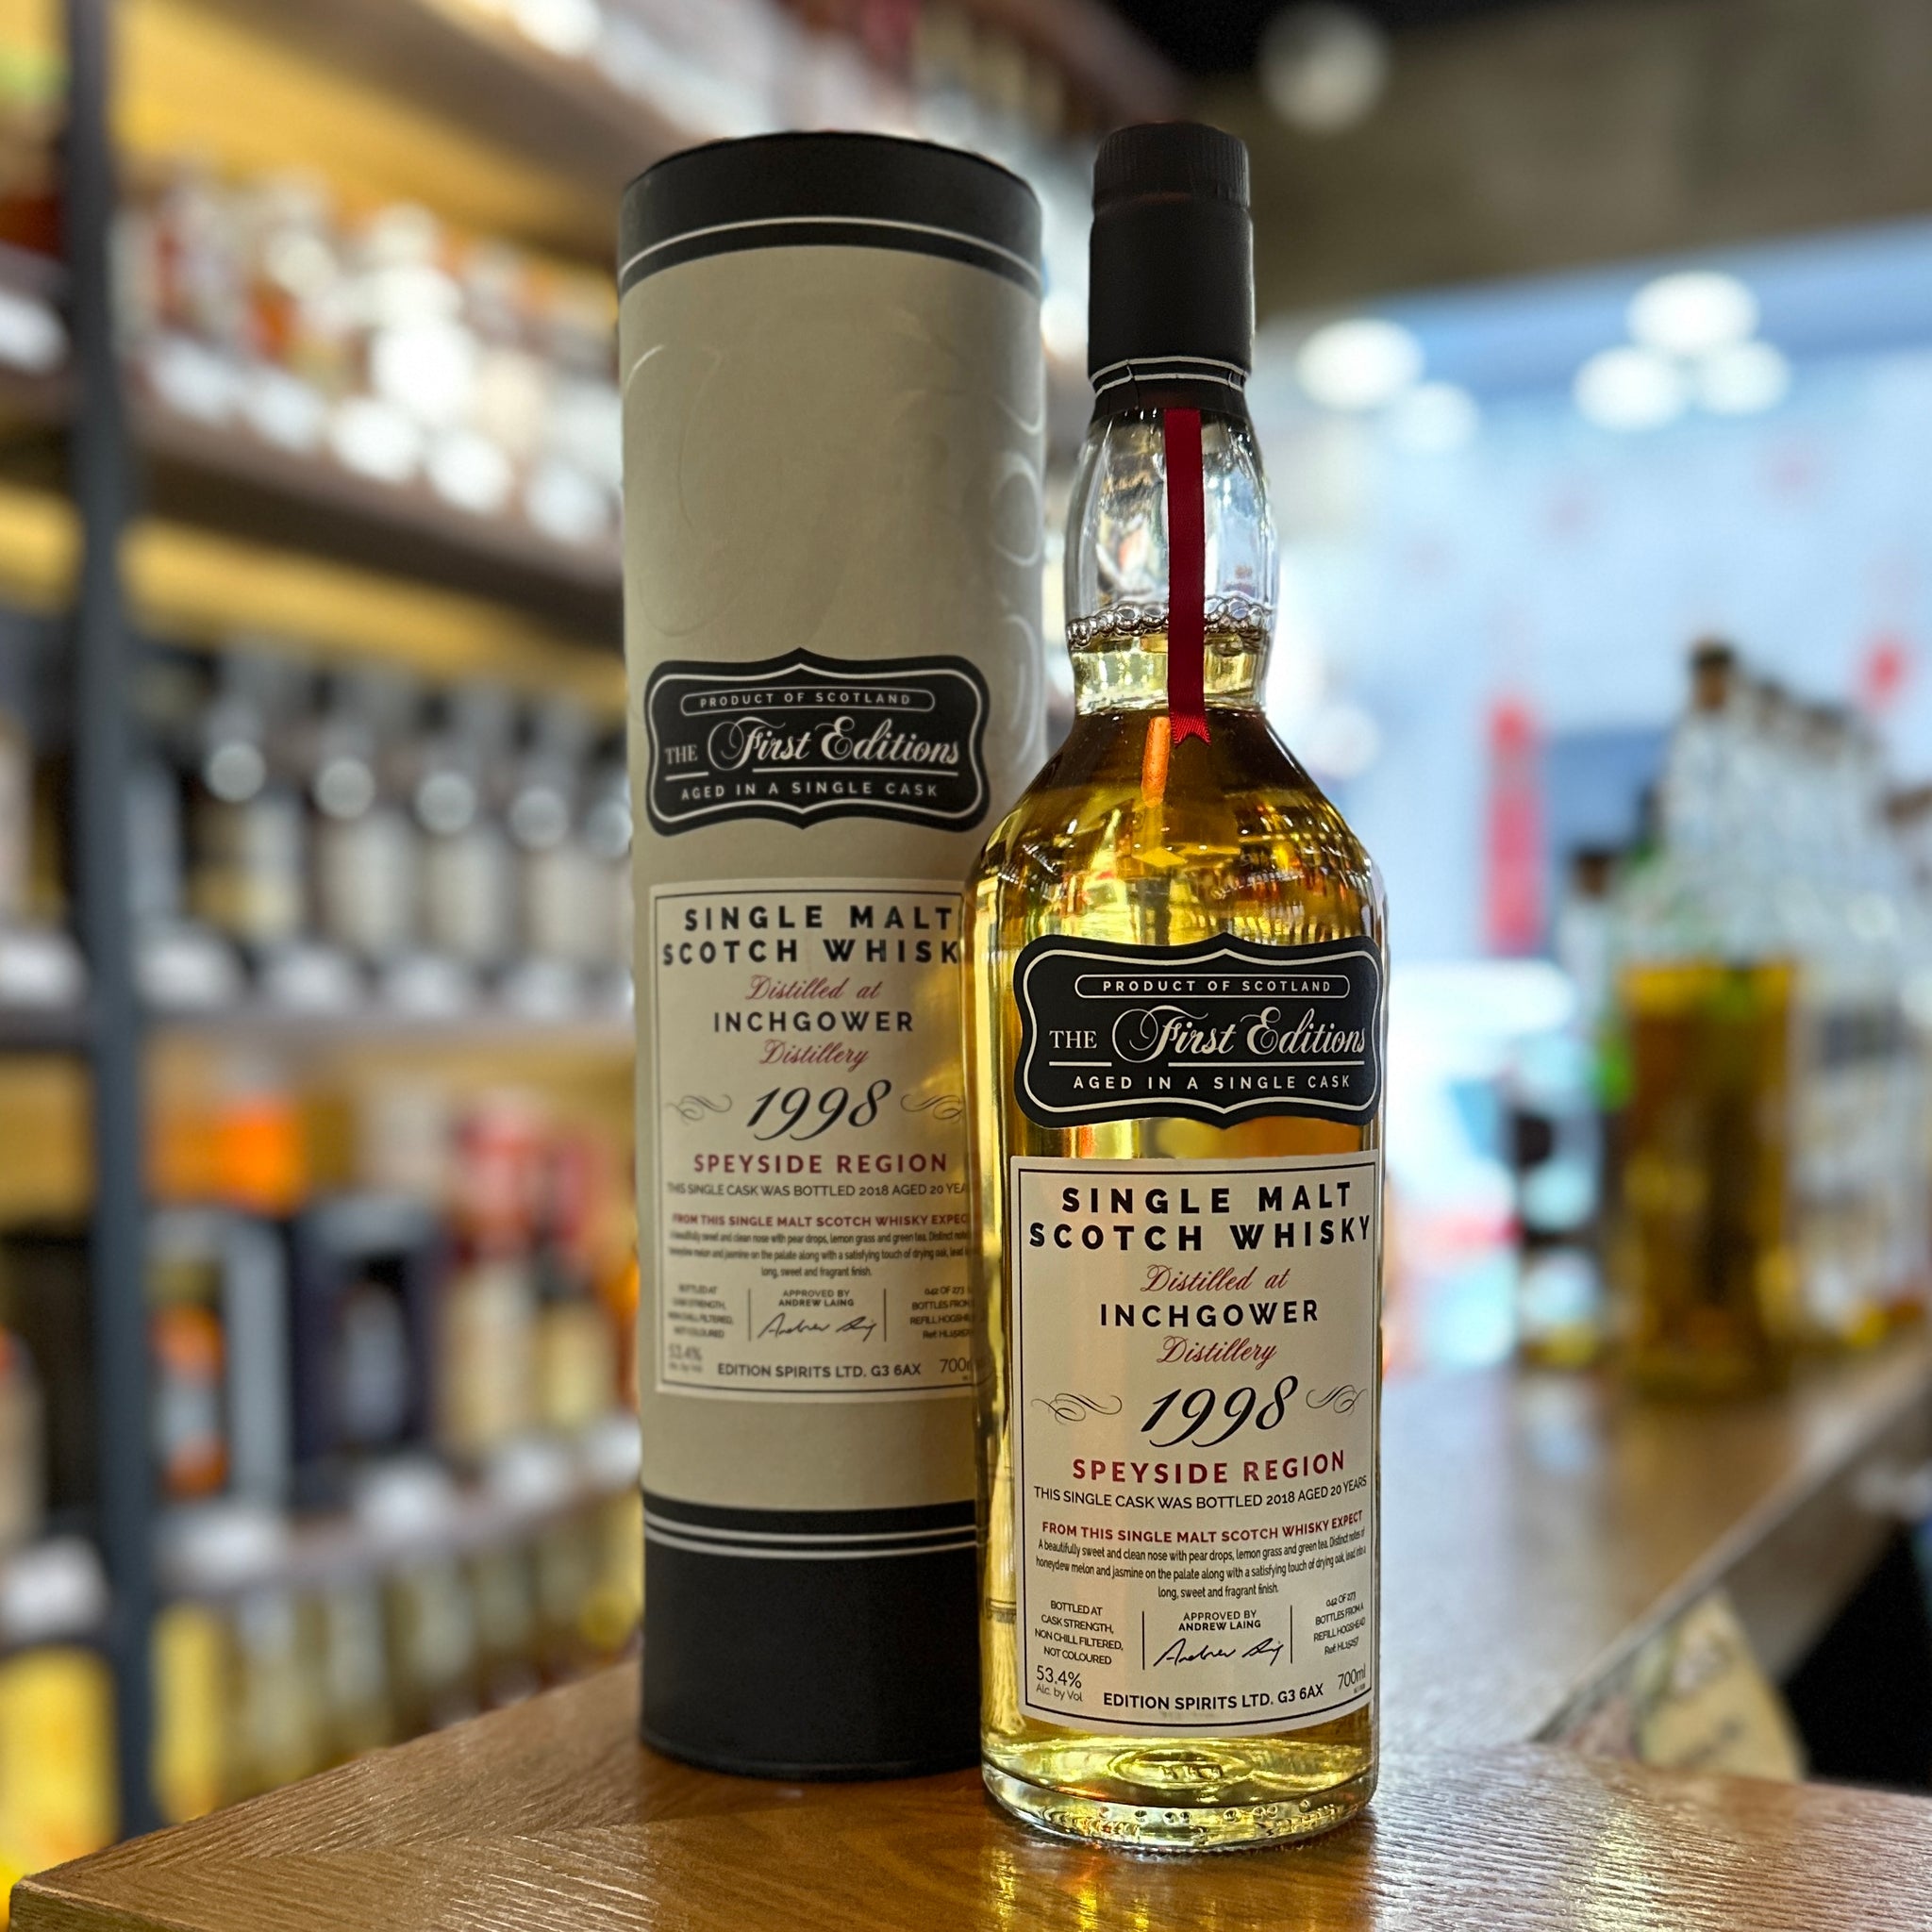 Inchgower 20 Year Old 1998-2018 by The First Editions Single Malt Scotch Whisky